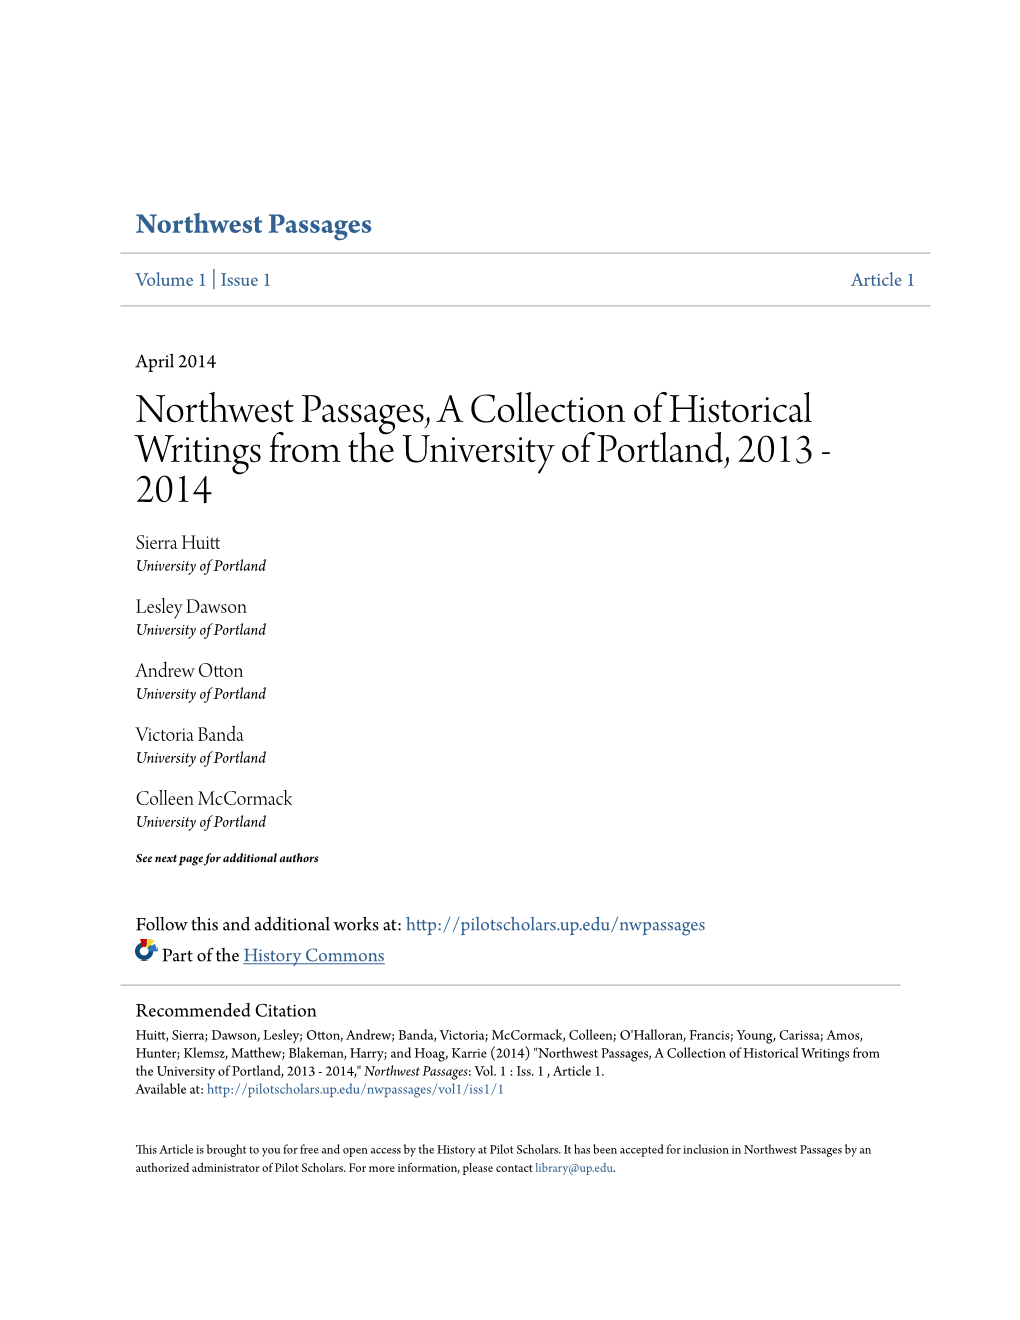 Northwest Passages, a Collection of Historical Writings from the University of Portland, 2013 - 2014 Sierra Huitt University of Portland